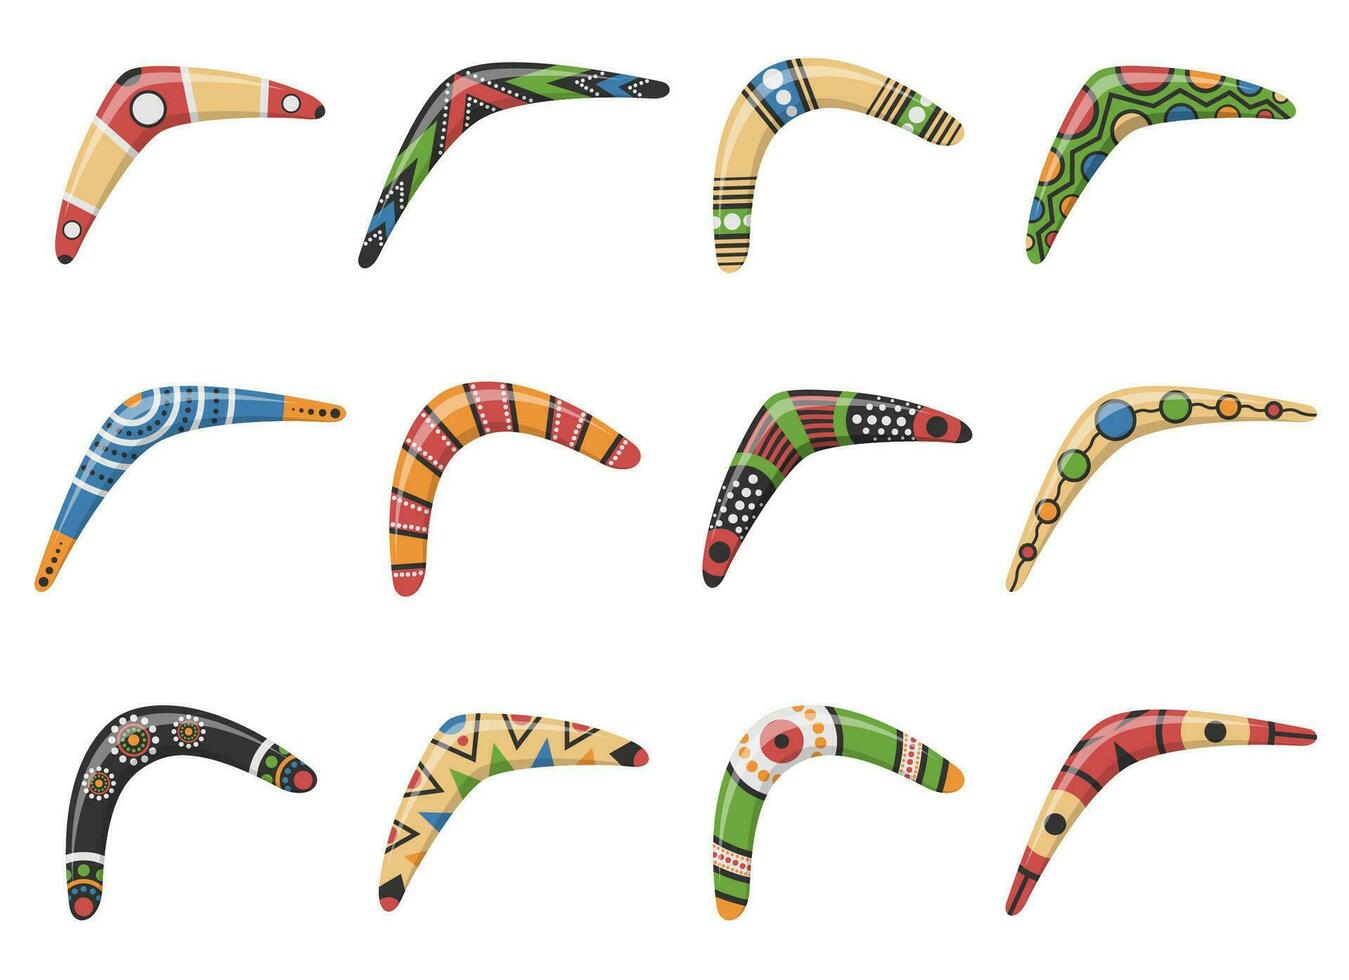 Traditional wooden boomerang of different shapes icons set isolated on white background. Australian native hunting and sport weapon. Aboriginal wooden boomerangs. Vector illustration.